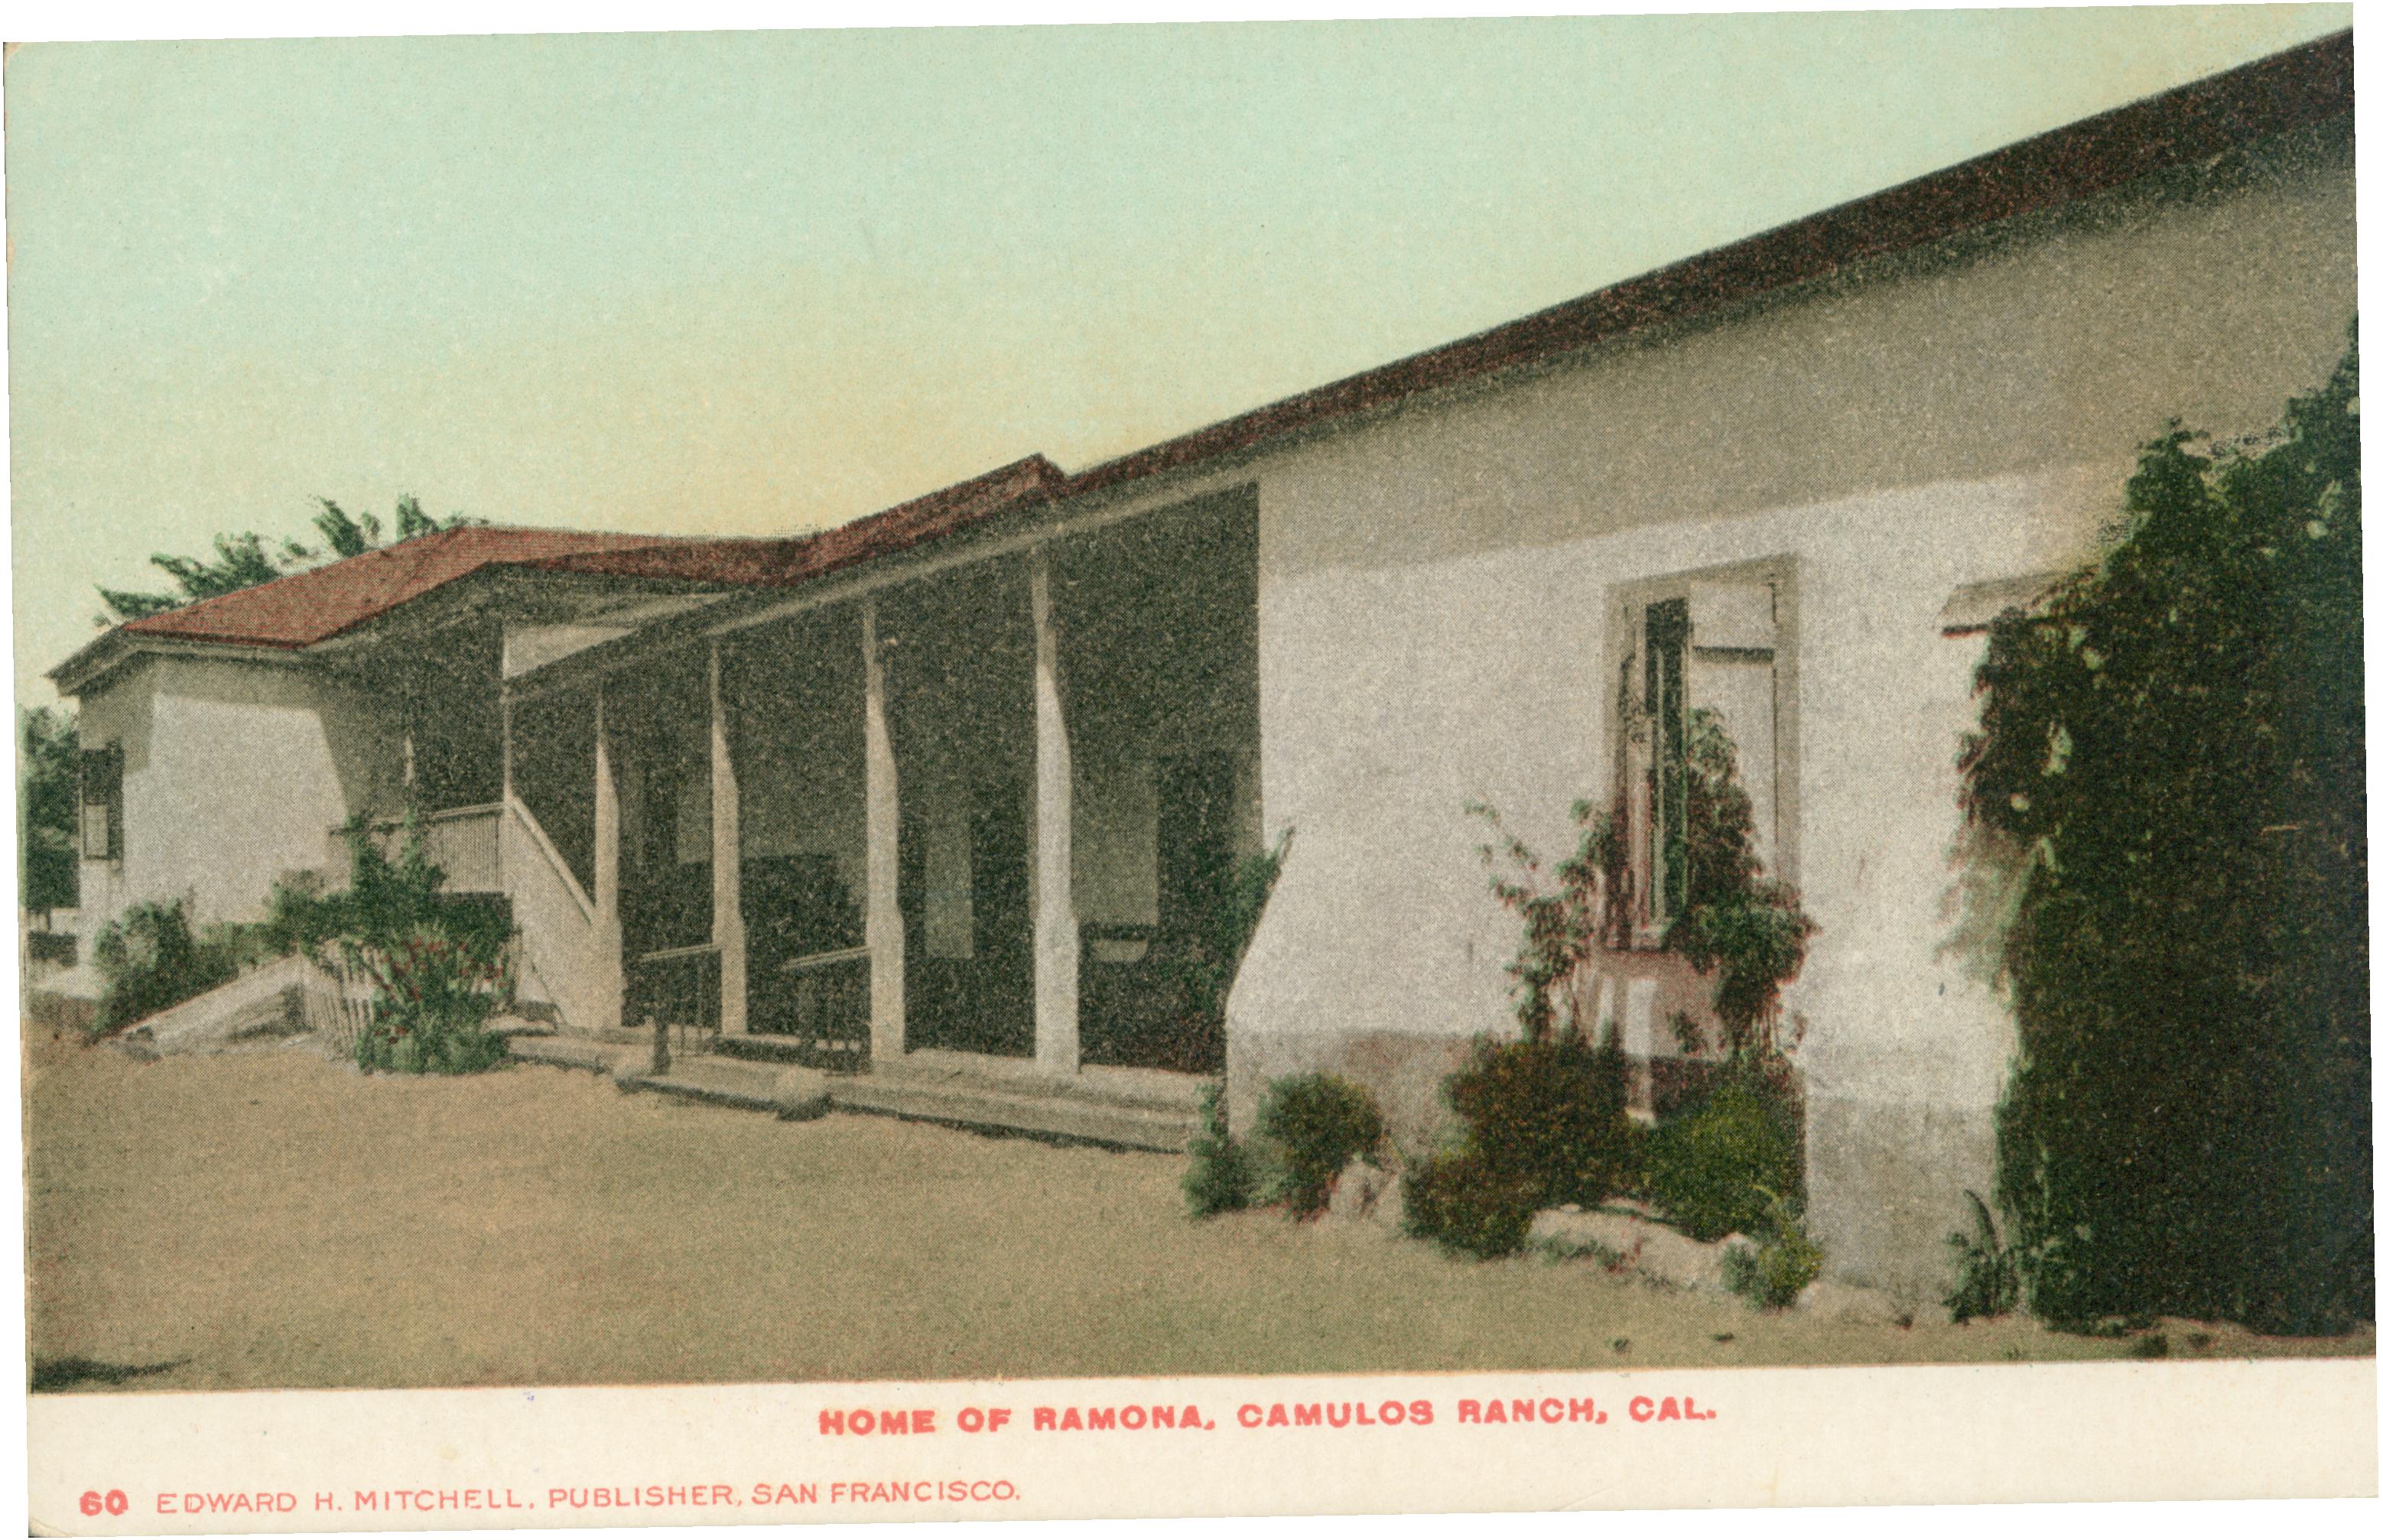 Shows the exterior of the Camulos Rancho